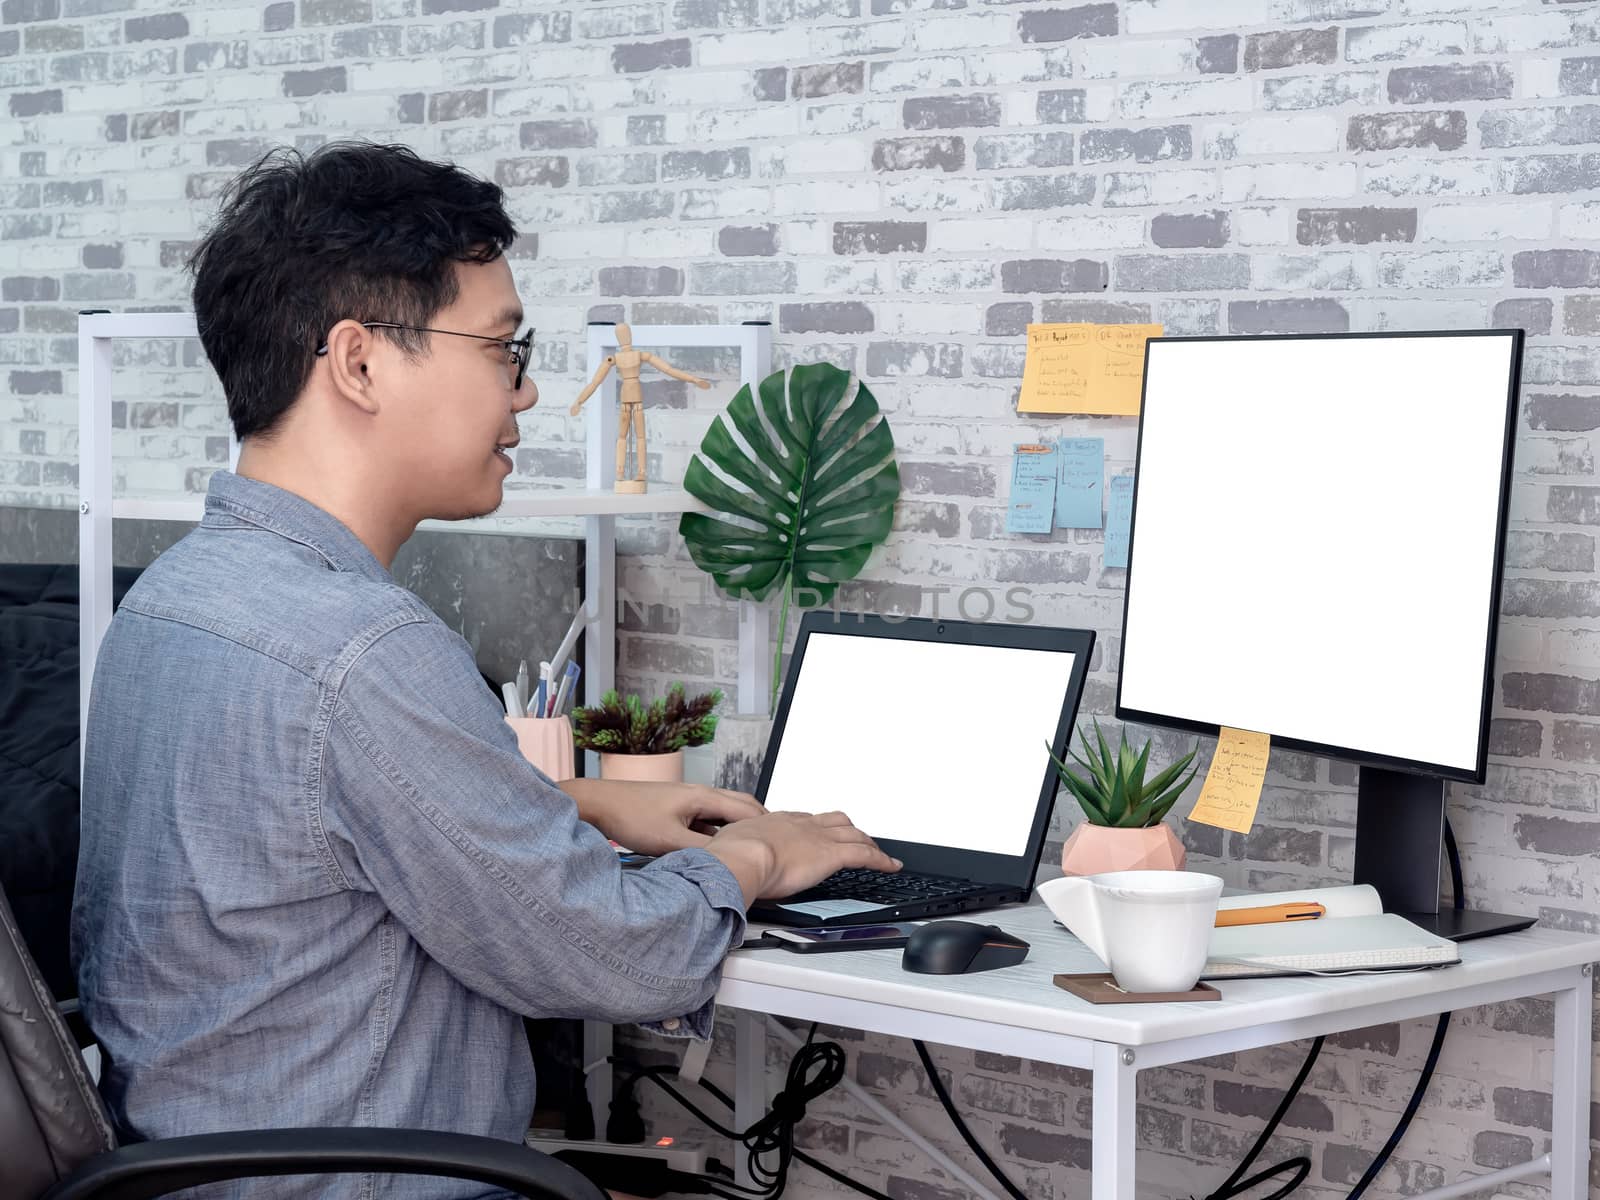 Asian man working and typing with laptop computer with white blank screen and watching another monitor in his room, condominium. Work at home and business online concept.